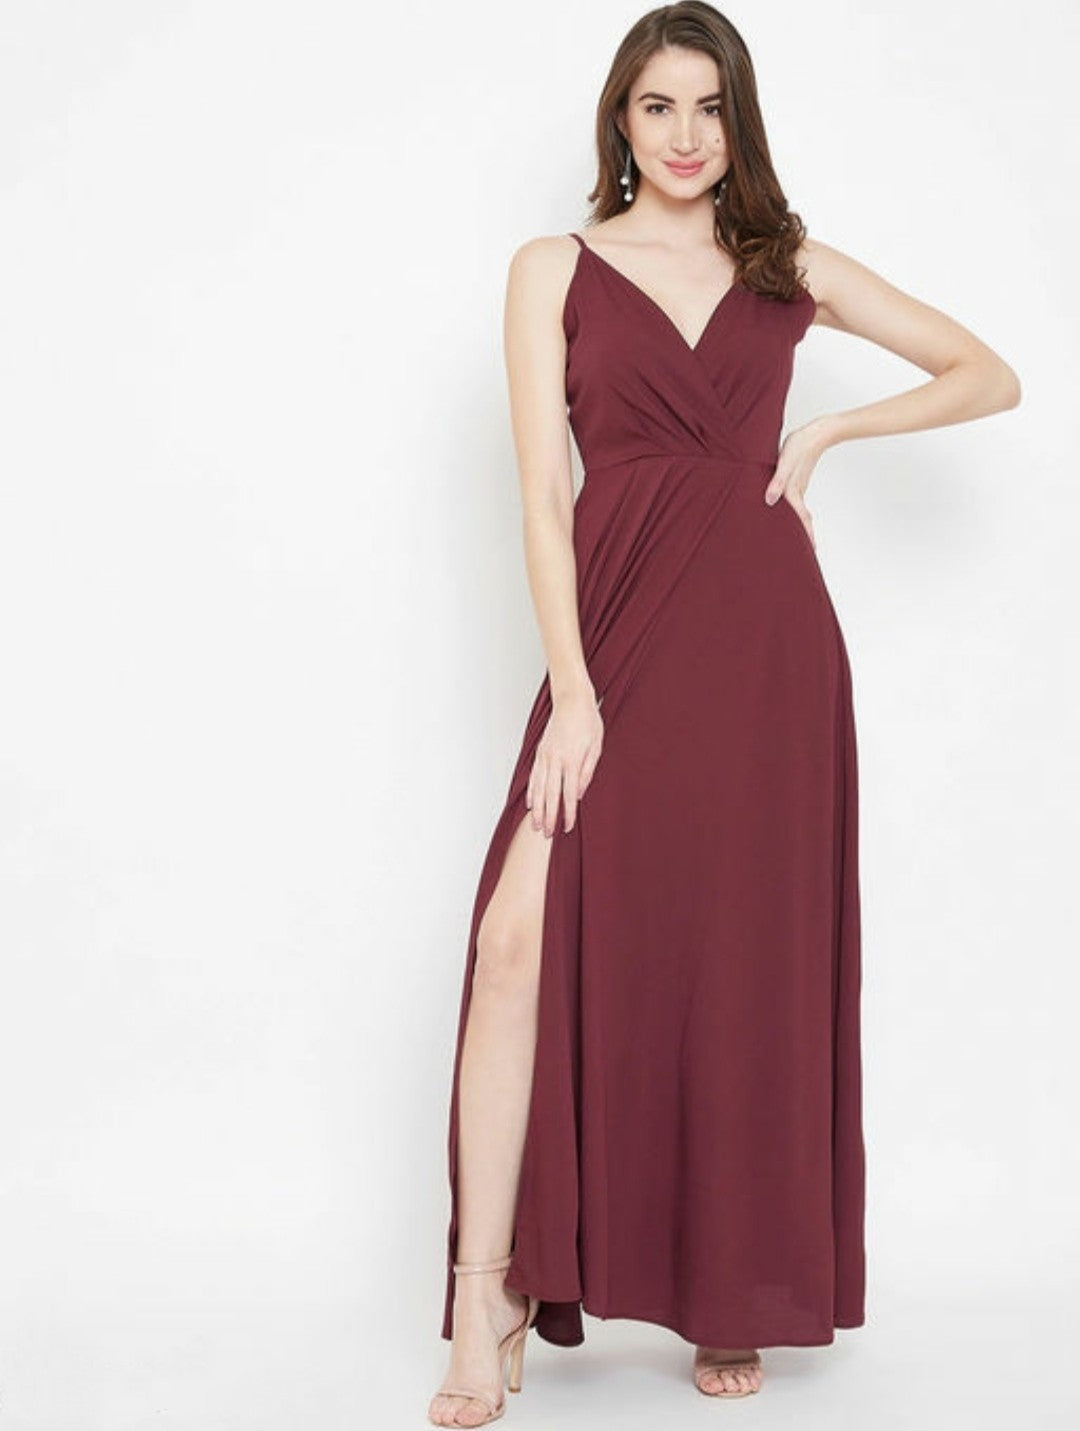 Buy Sexy Dresses Online – Women Party Wear, Ladies Clothes shops